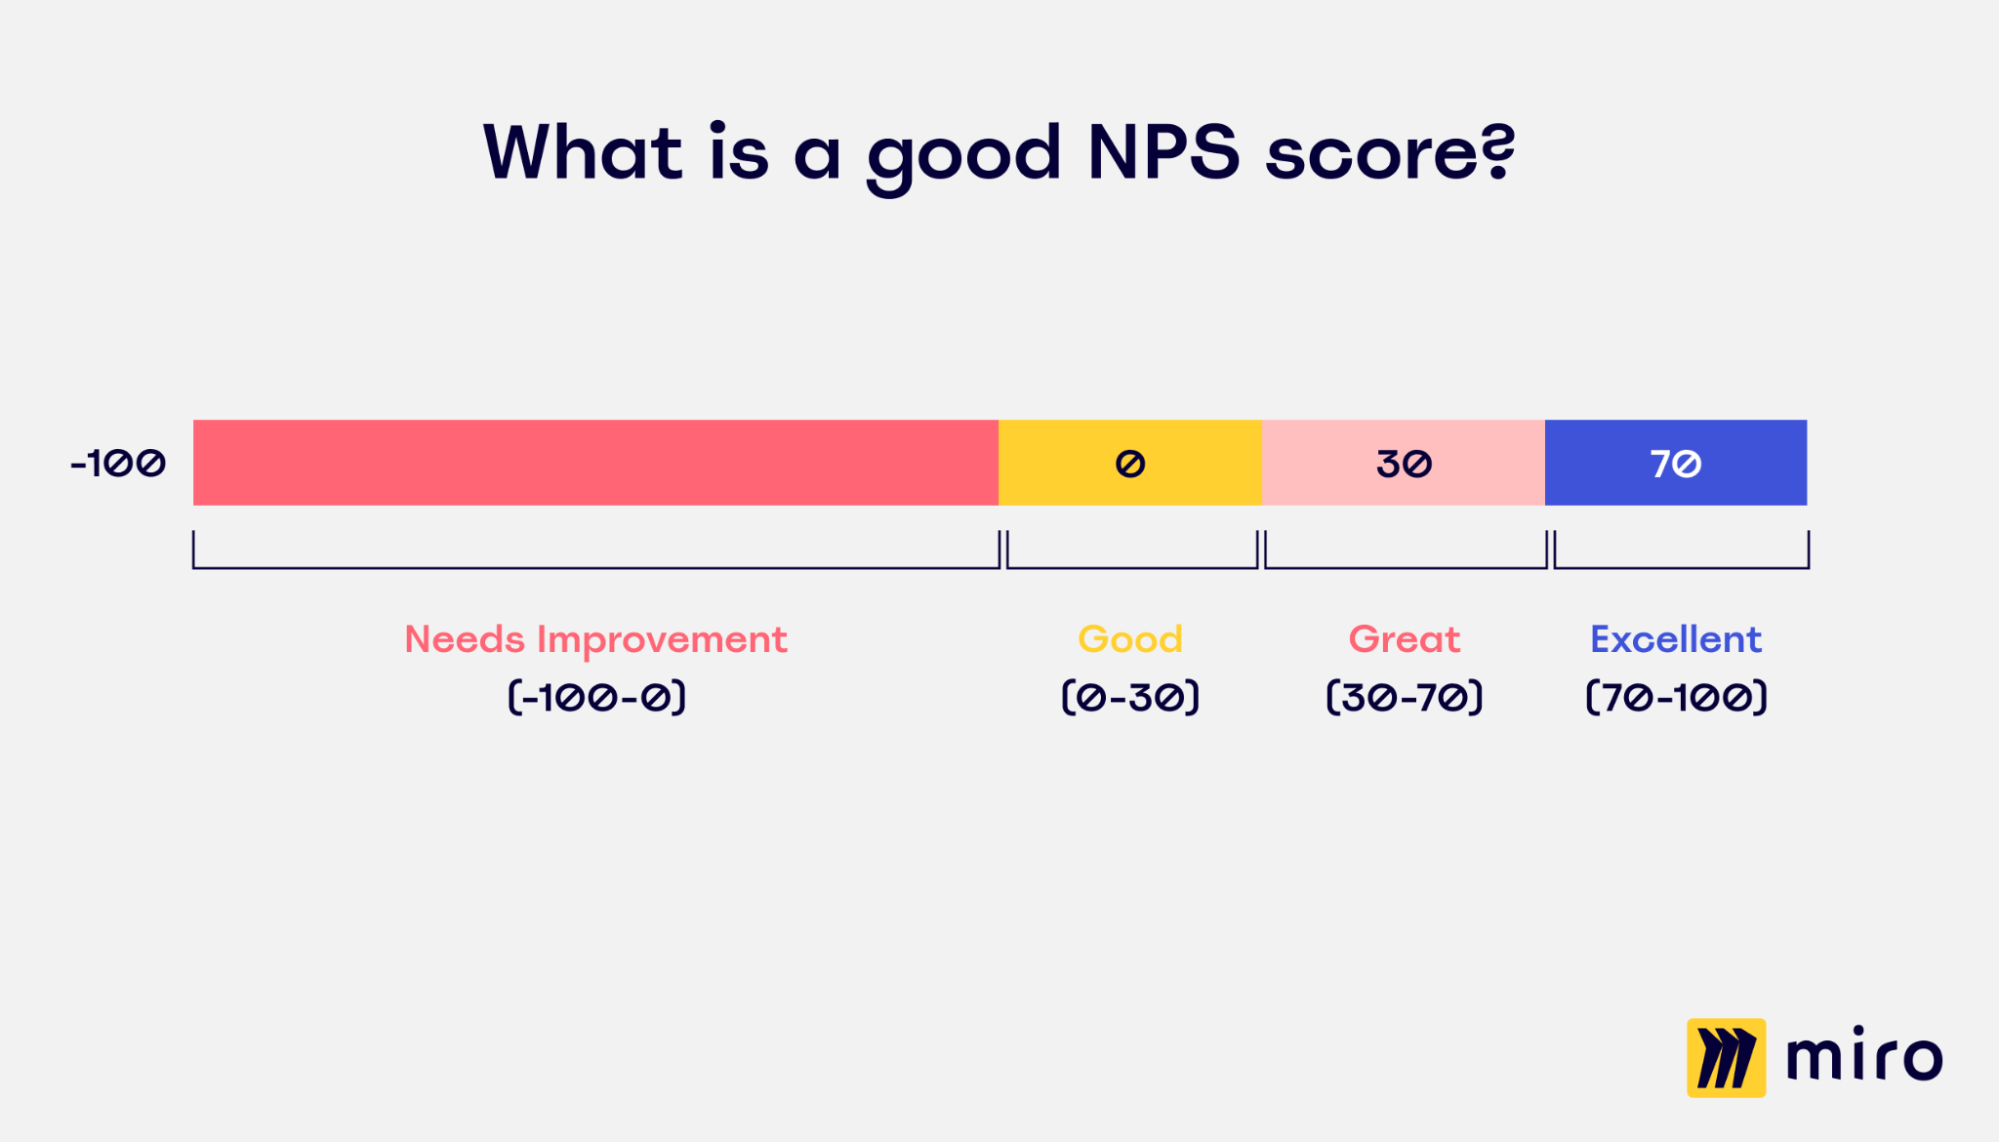 Image of how businesses rank a good NPS score